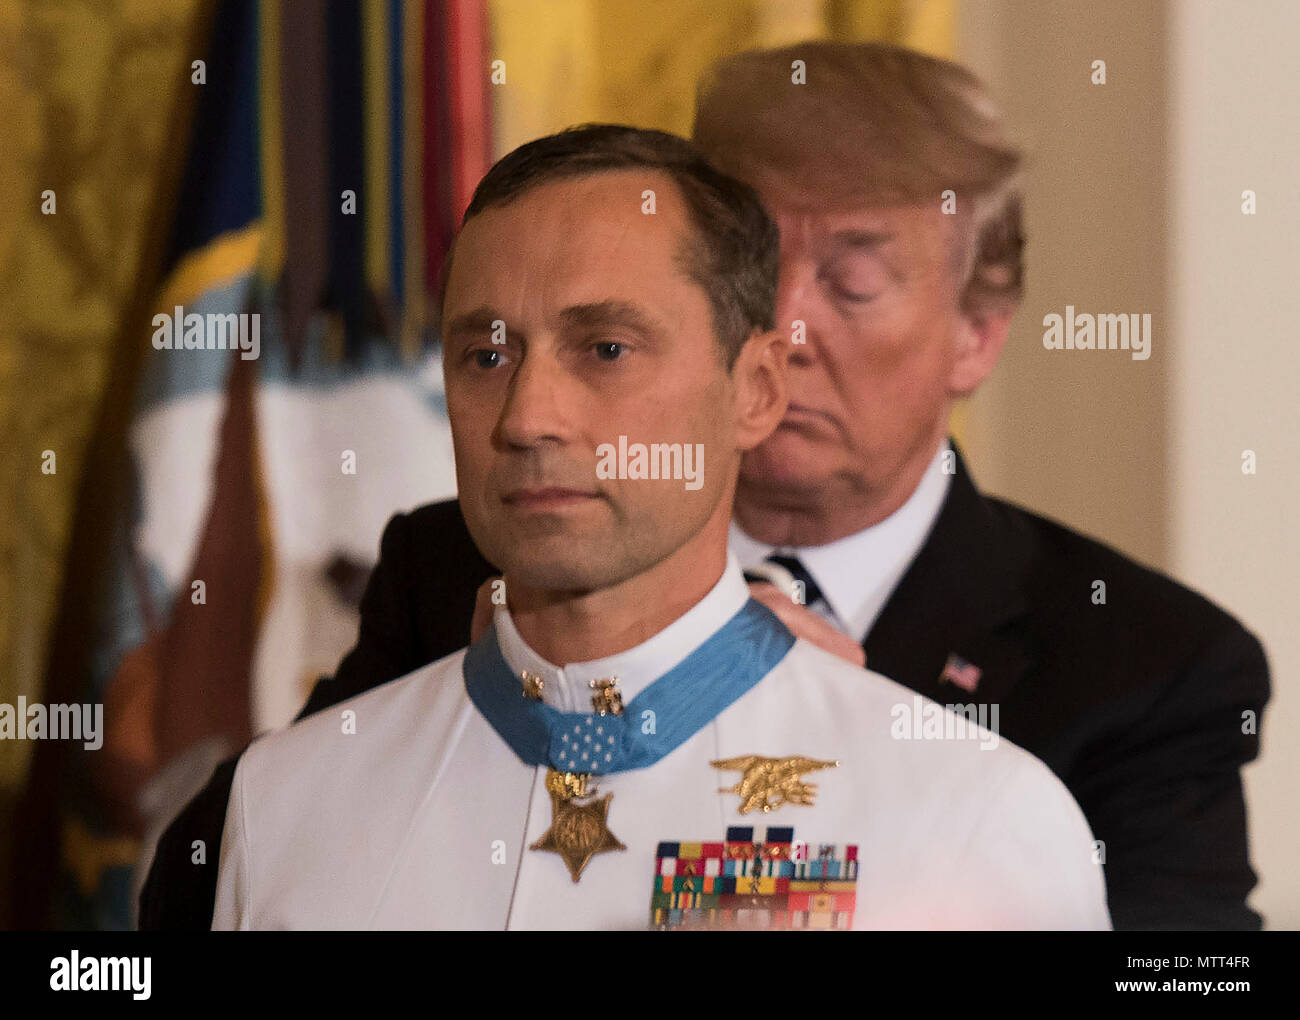 180524-N-BB269-003  WASHINGTON (May 24, 2018) President Donald J. Trump presents the Medal of Honor to retired Master Chief Special Warfare Operator (SEAL) Britt Slabinski during a ceremony at the White House in Washington, D.C. Slabinski received the Medal of Honor for his actions during Operation Anaconda in Afghanistan in March 2002. (U.S. Navy photo by Mass Communication Specialist 1st Class Raymond D. Diaz III/Released) Stock Photo